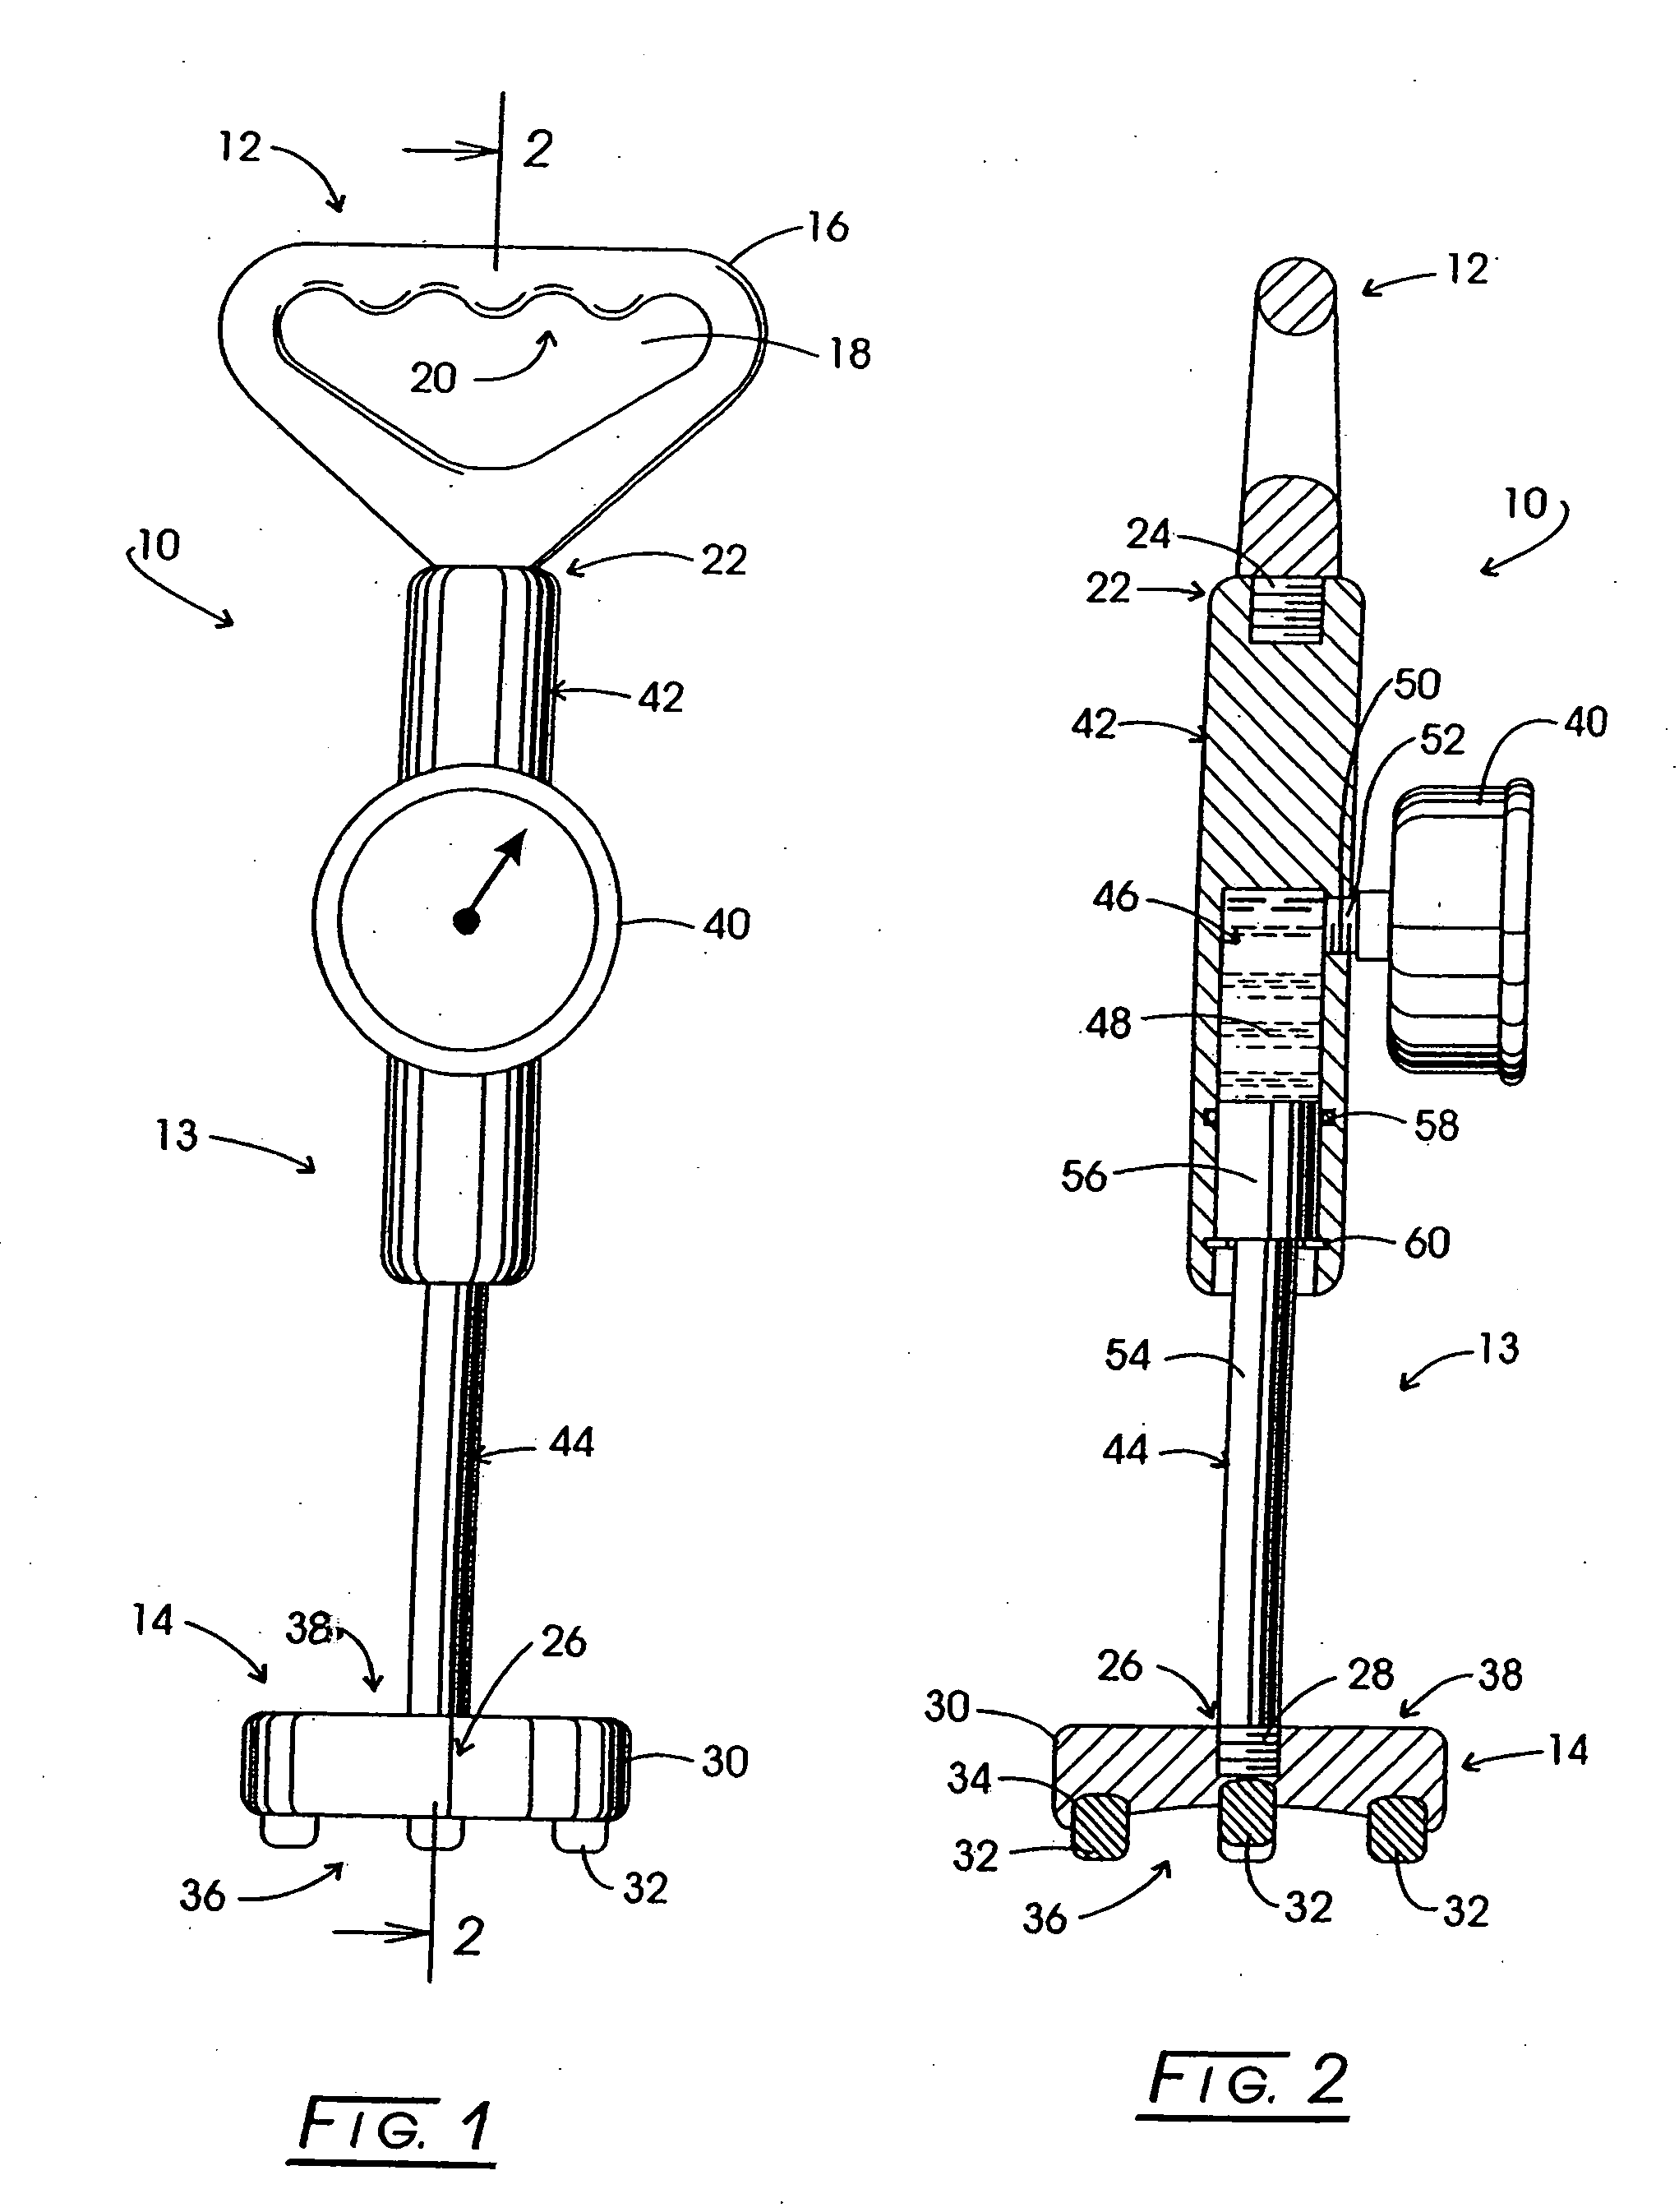 Apparatus, systems, and methods for continuous pressure technique therapy